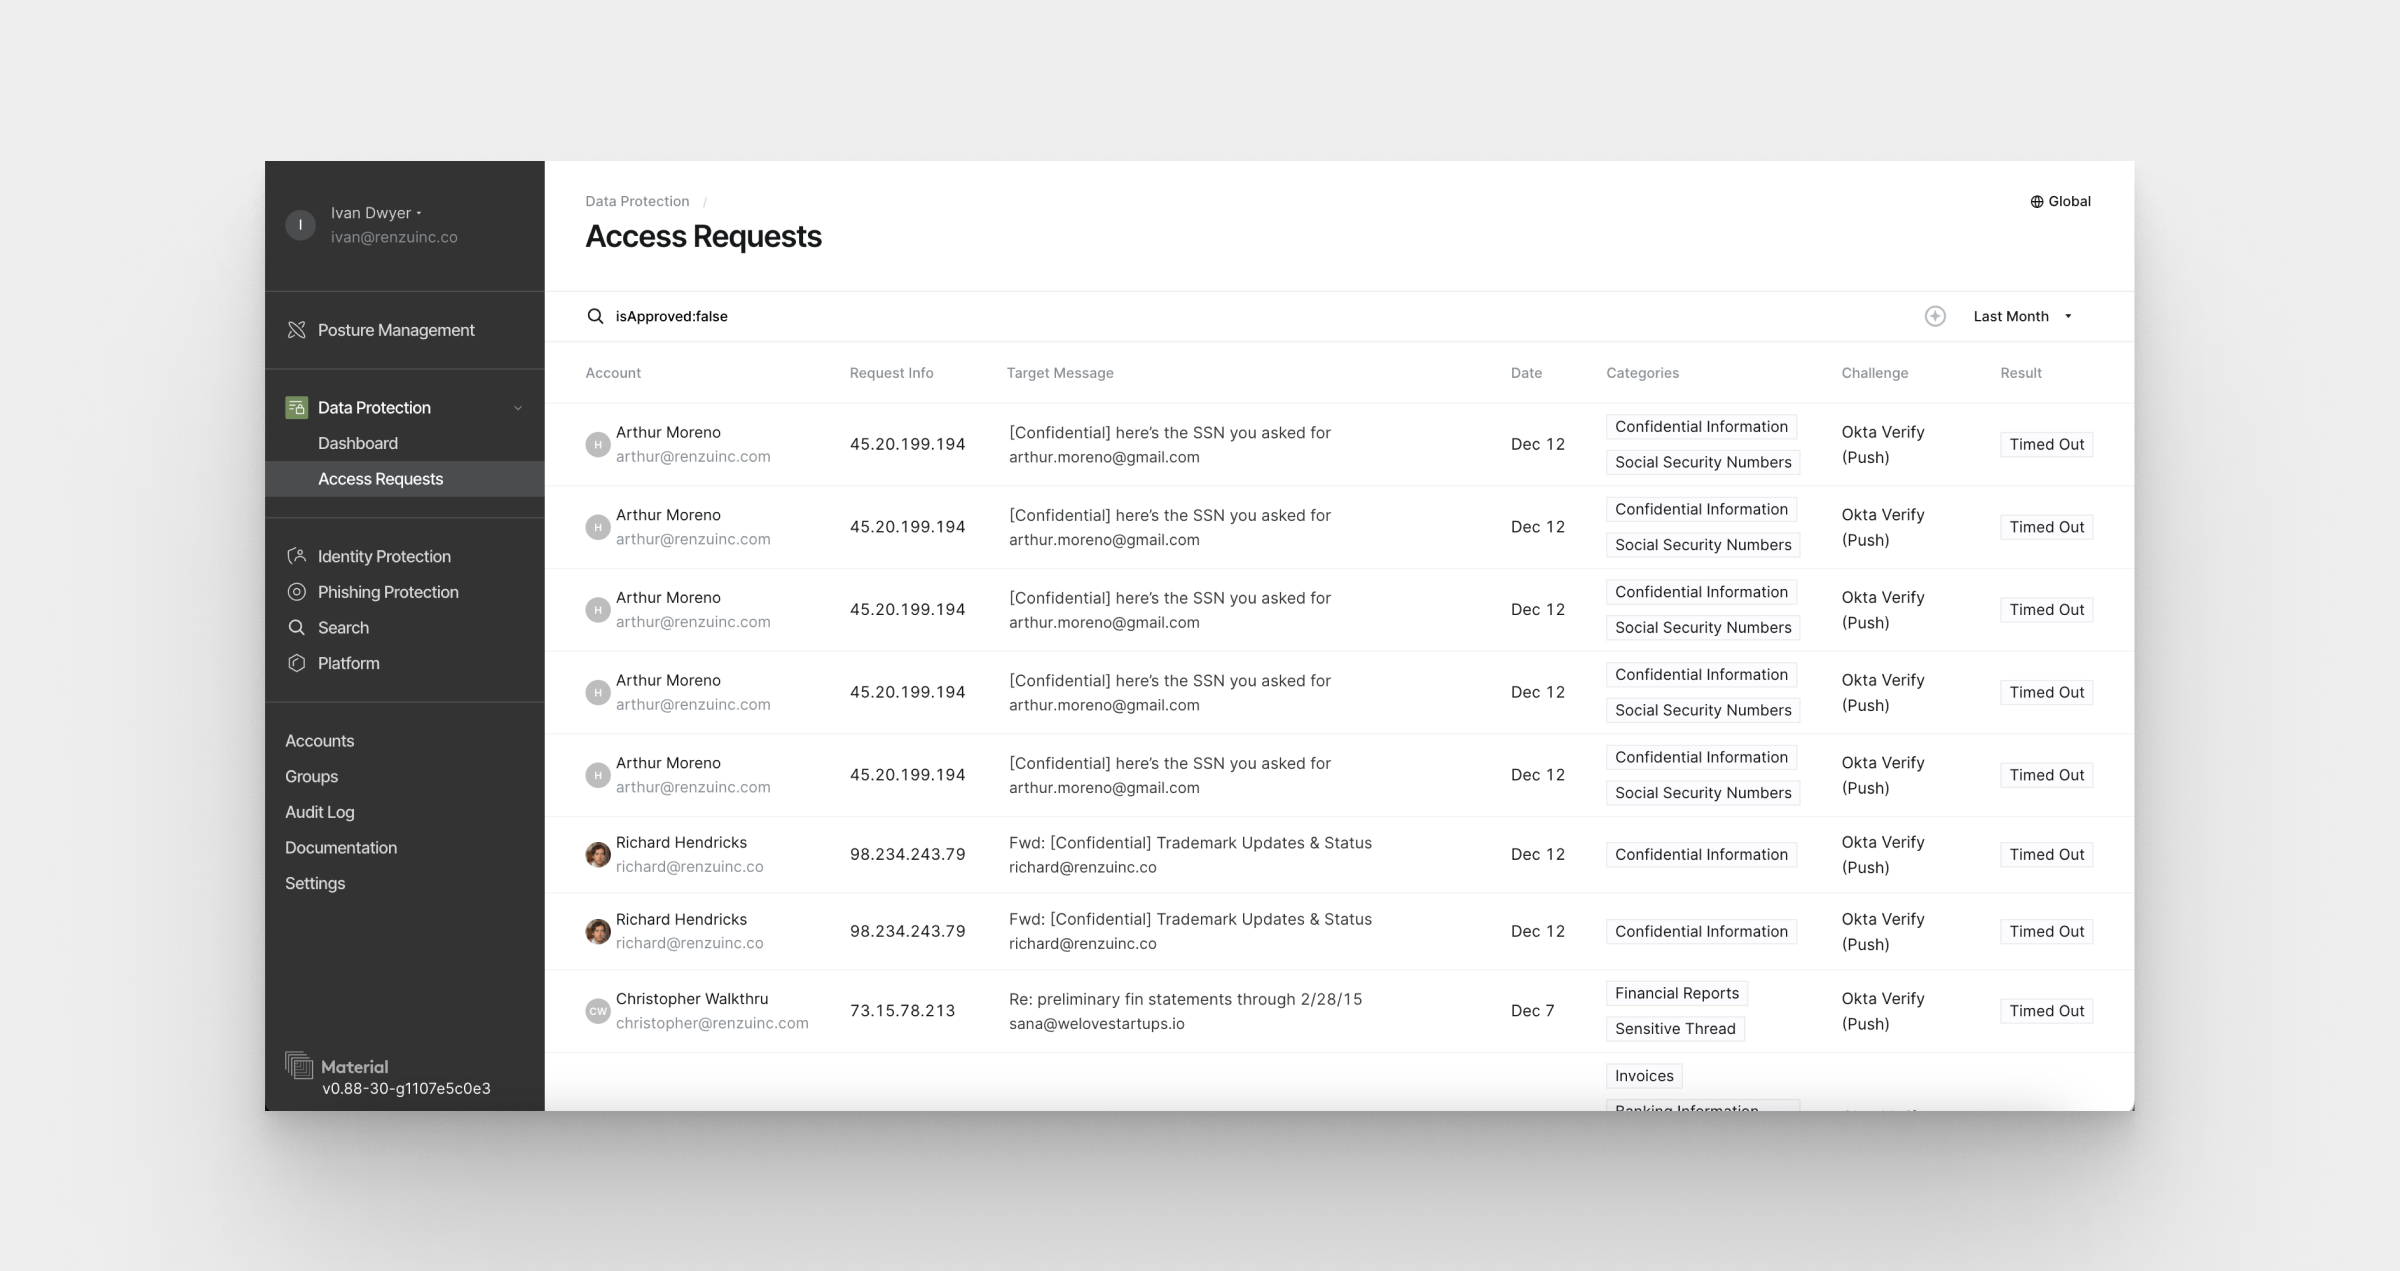 Access Requests in the Material Dashboard